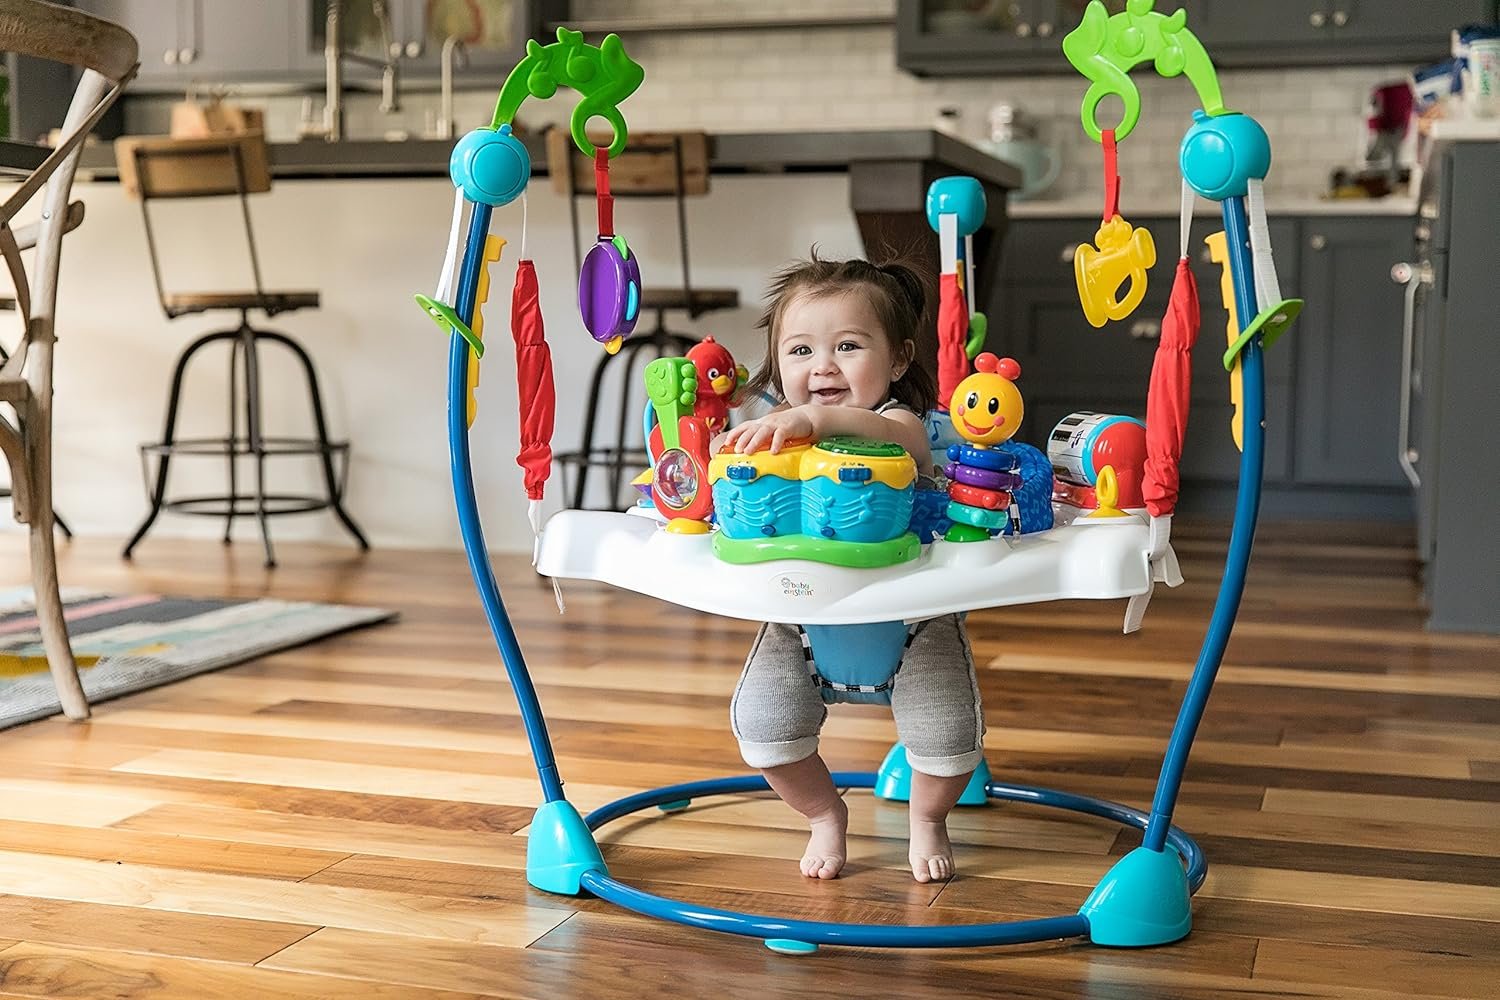 Baby Einstein Jumpers: Which Model is Best for Your Baby?